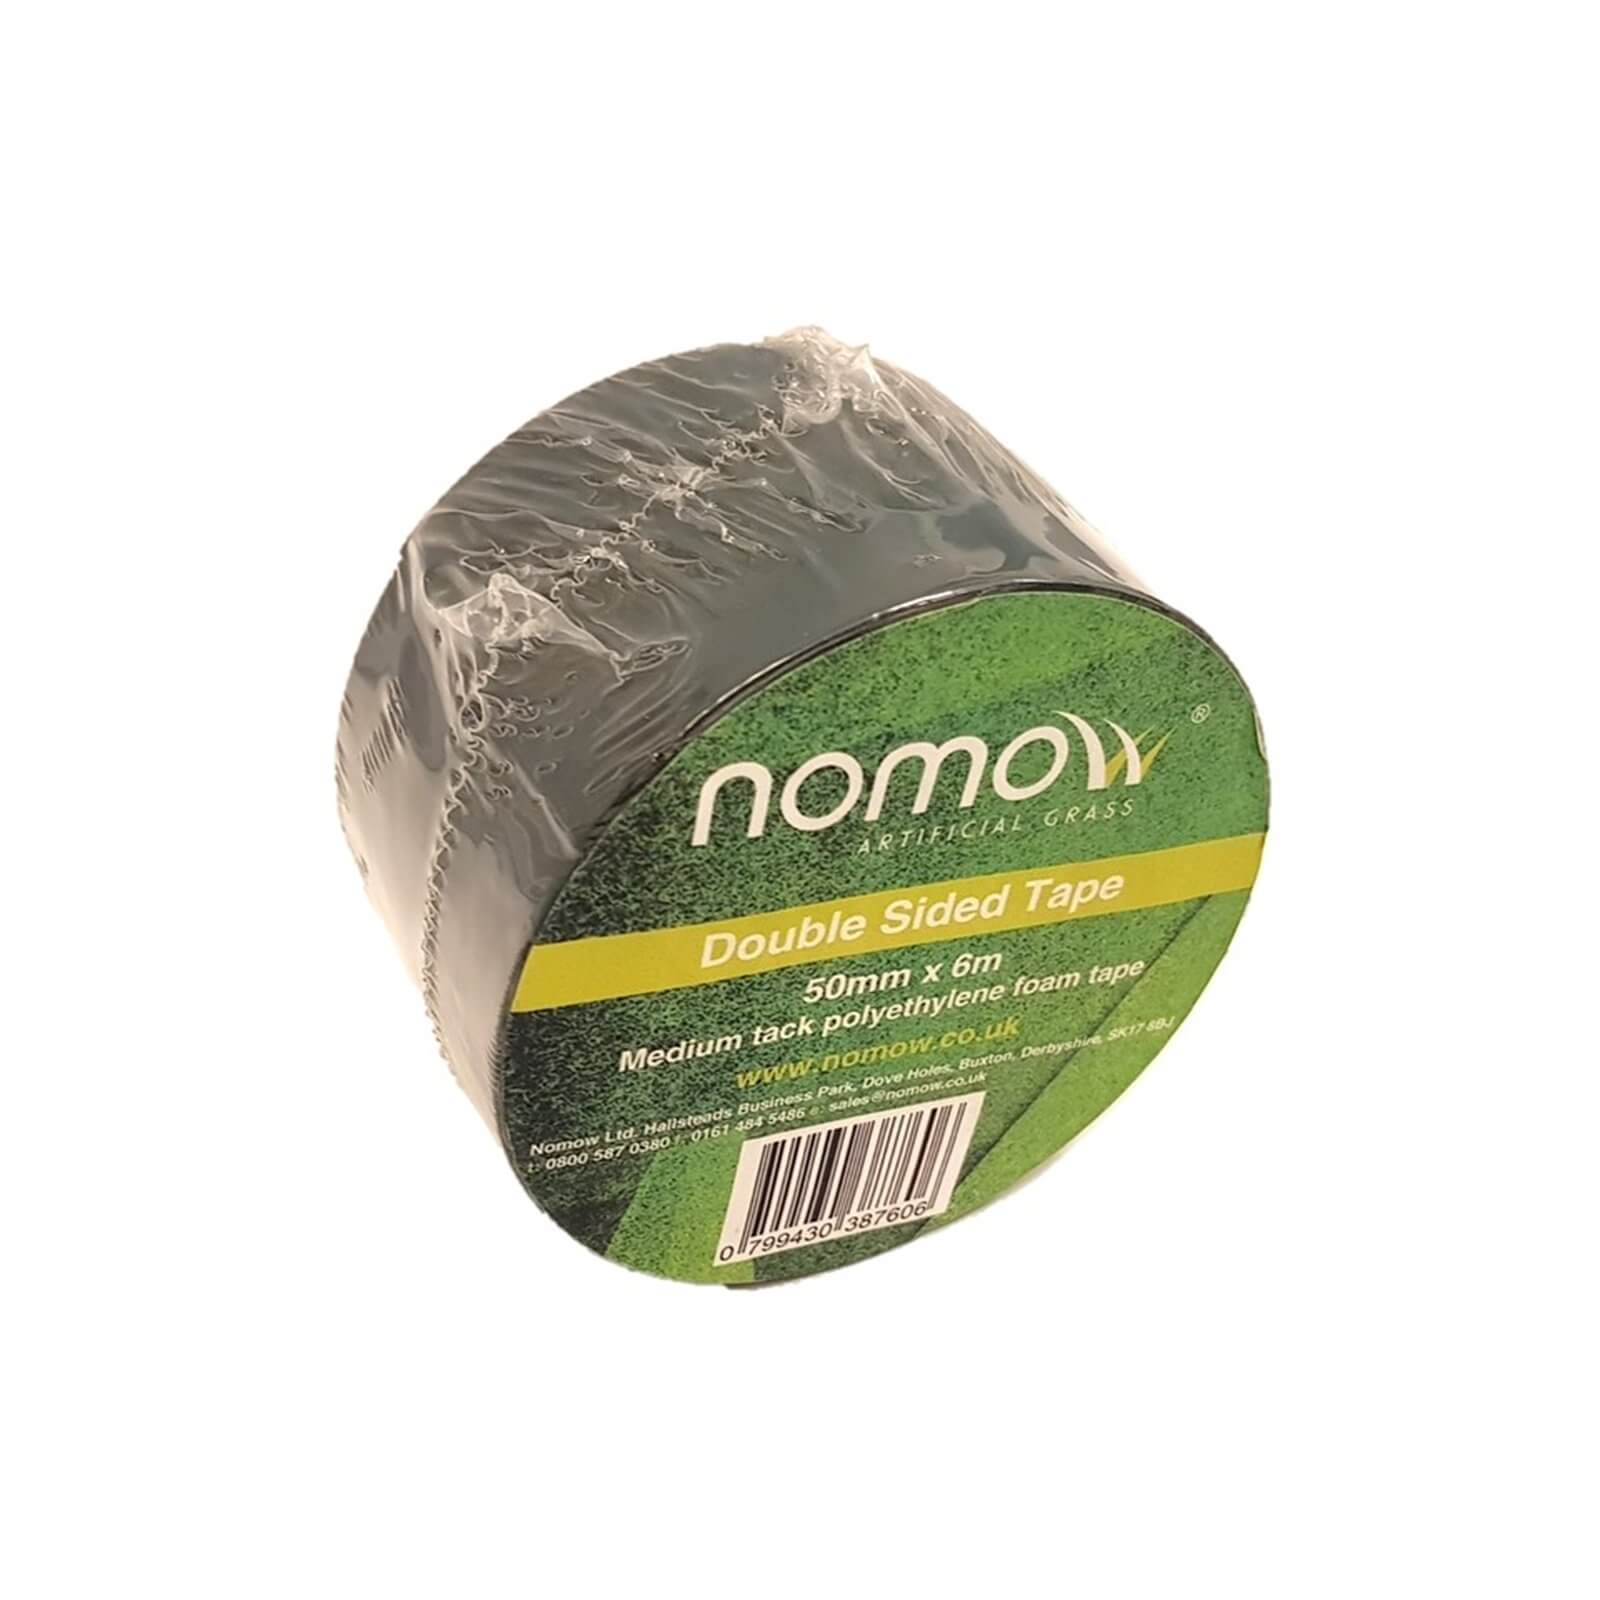 Double Sided Fixing Tape - 6m Artificial Grass Accessory